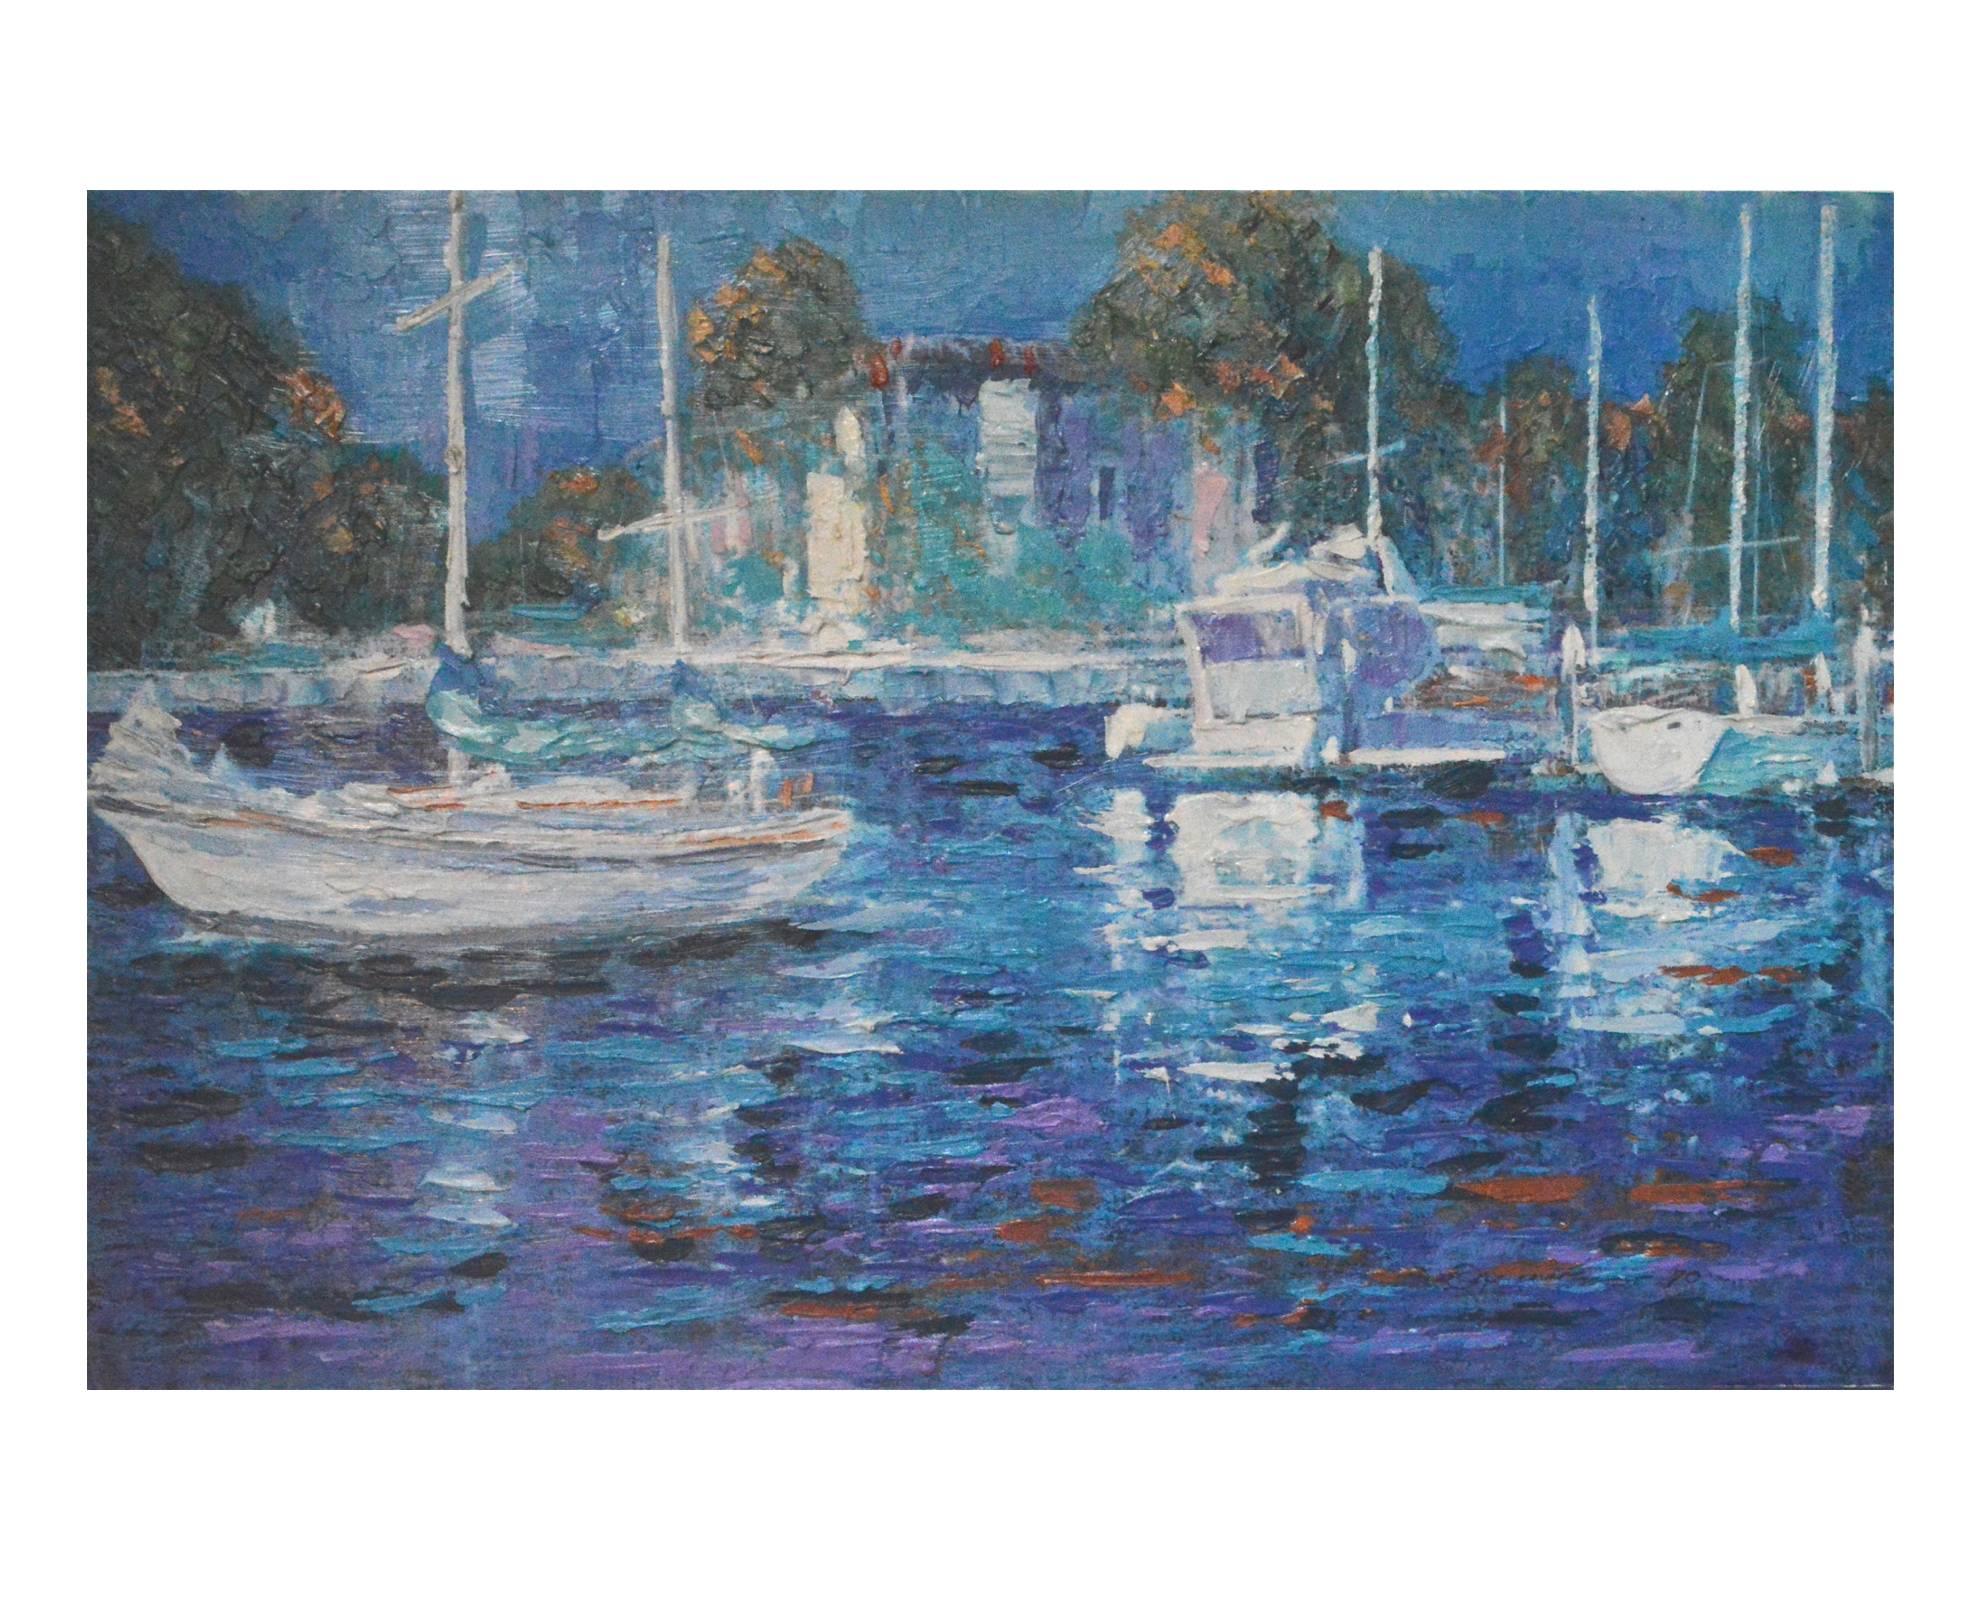 Painting of Picturesque Marina